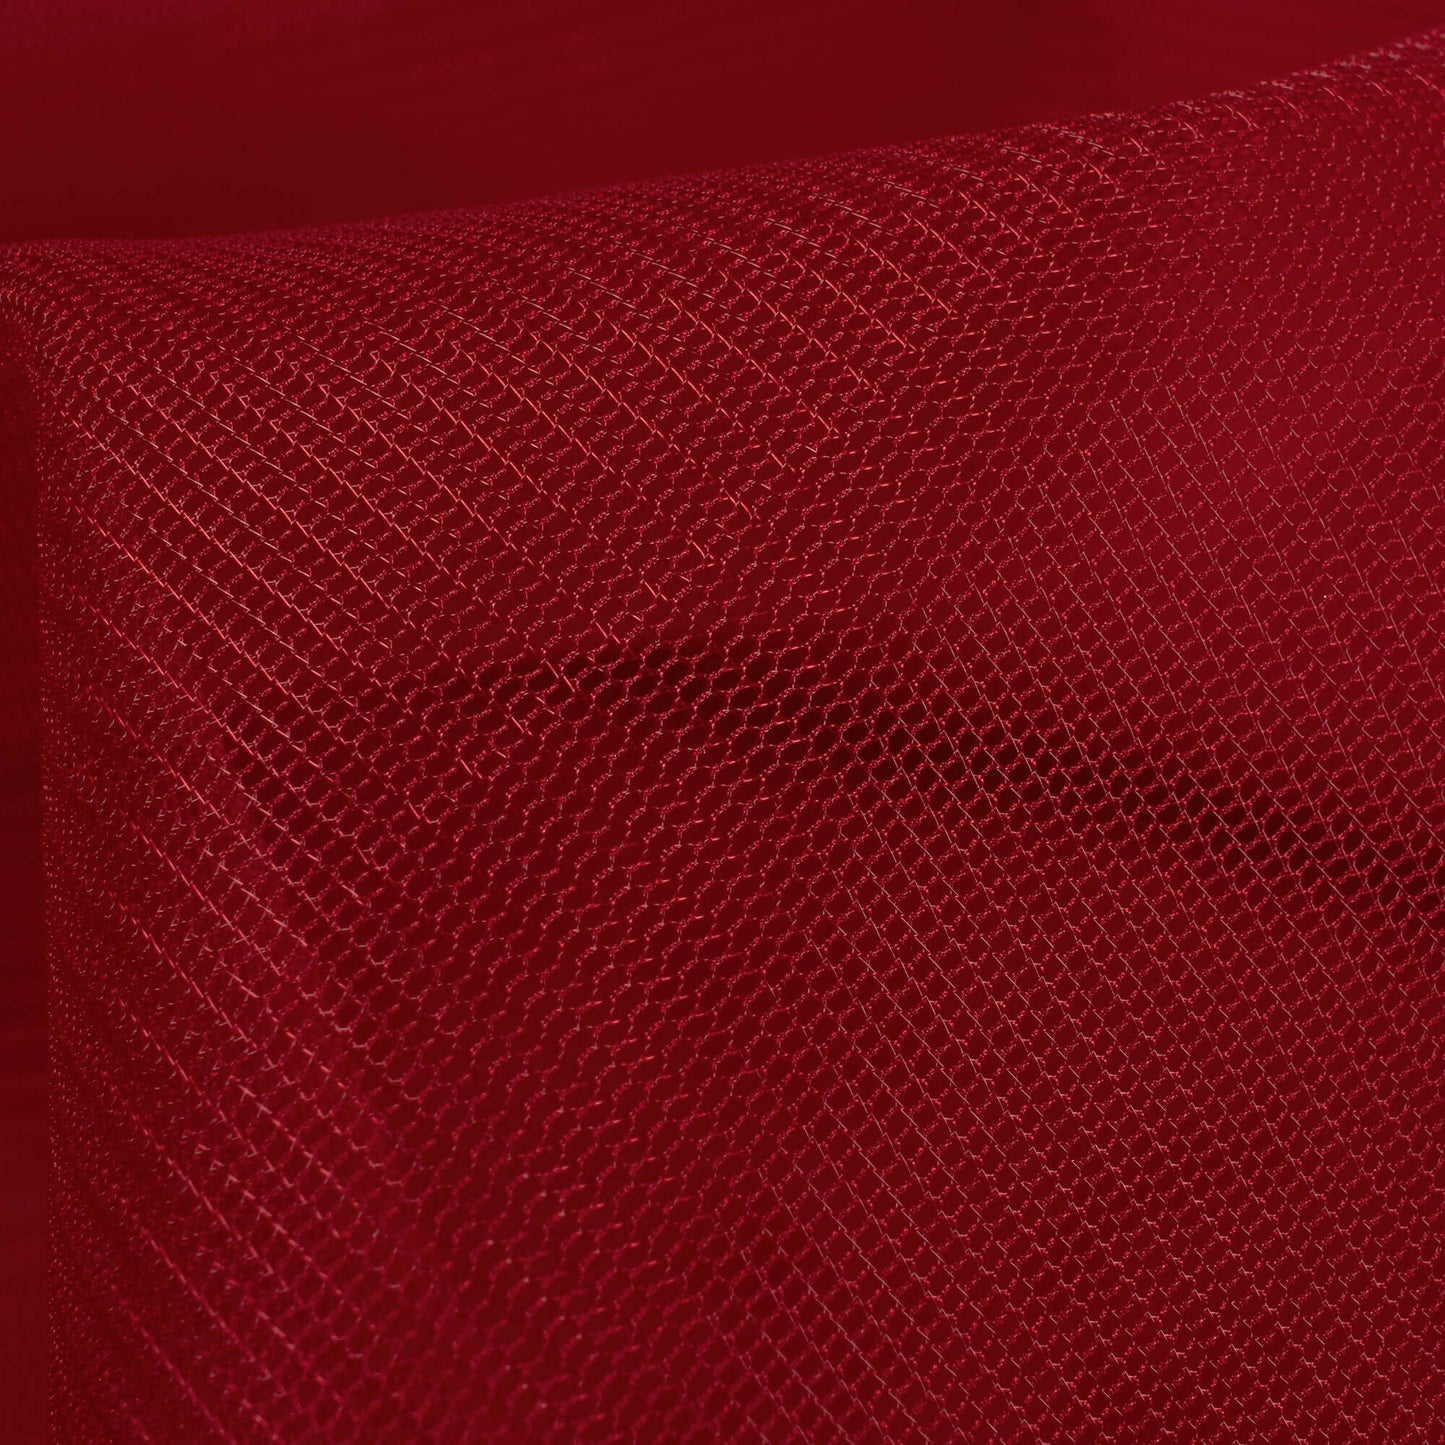 Blood Red Plain Premium Quality Butterfly Net Fabric